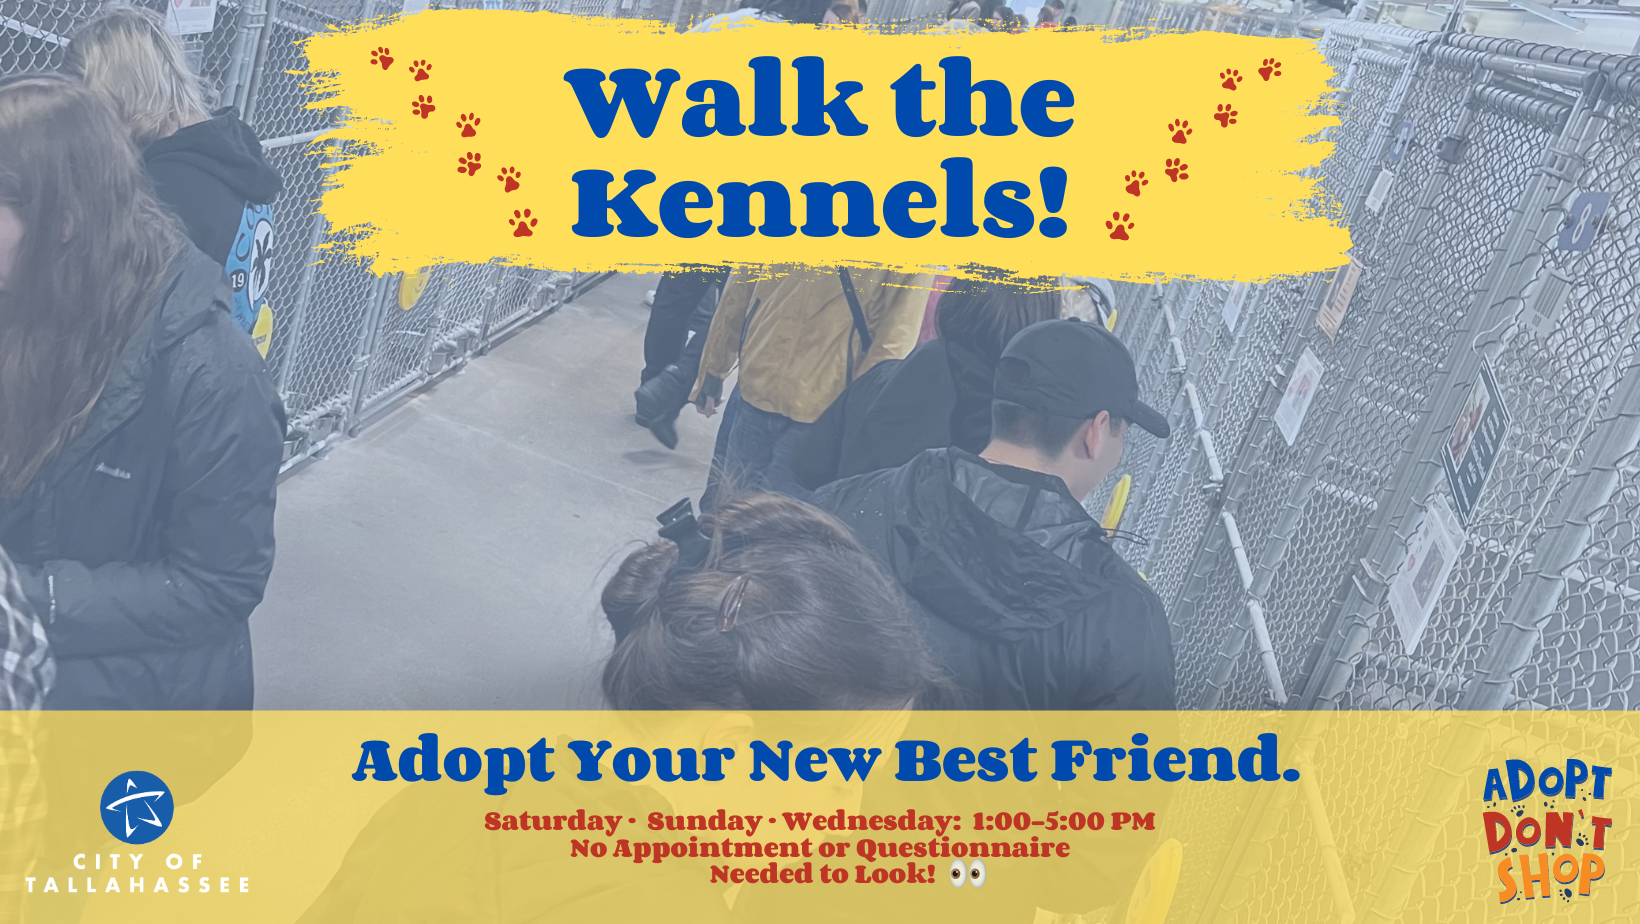 Walk the Kennels on Sundays through Wednesdays from 1:00 - 5:00pm